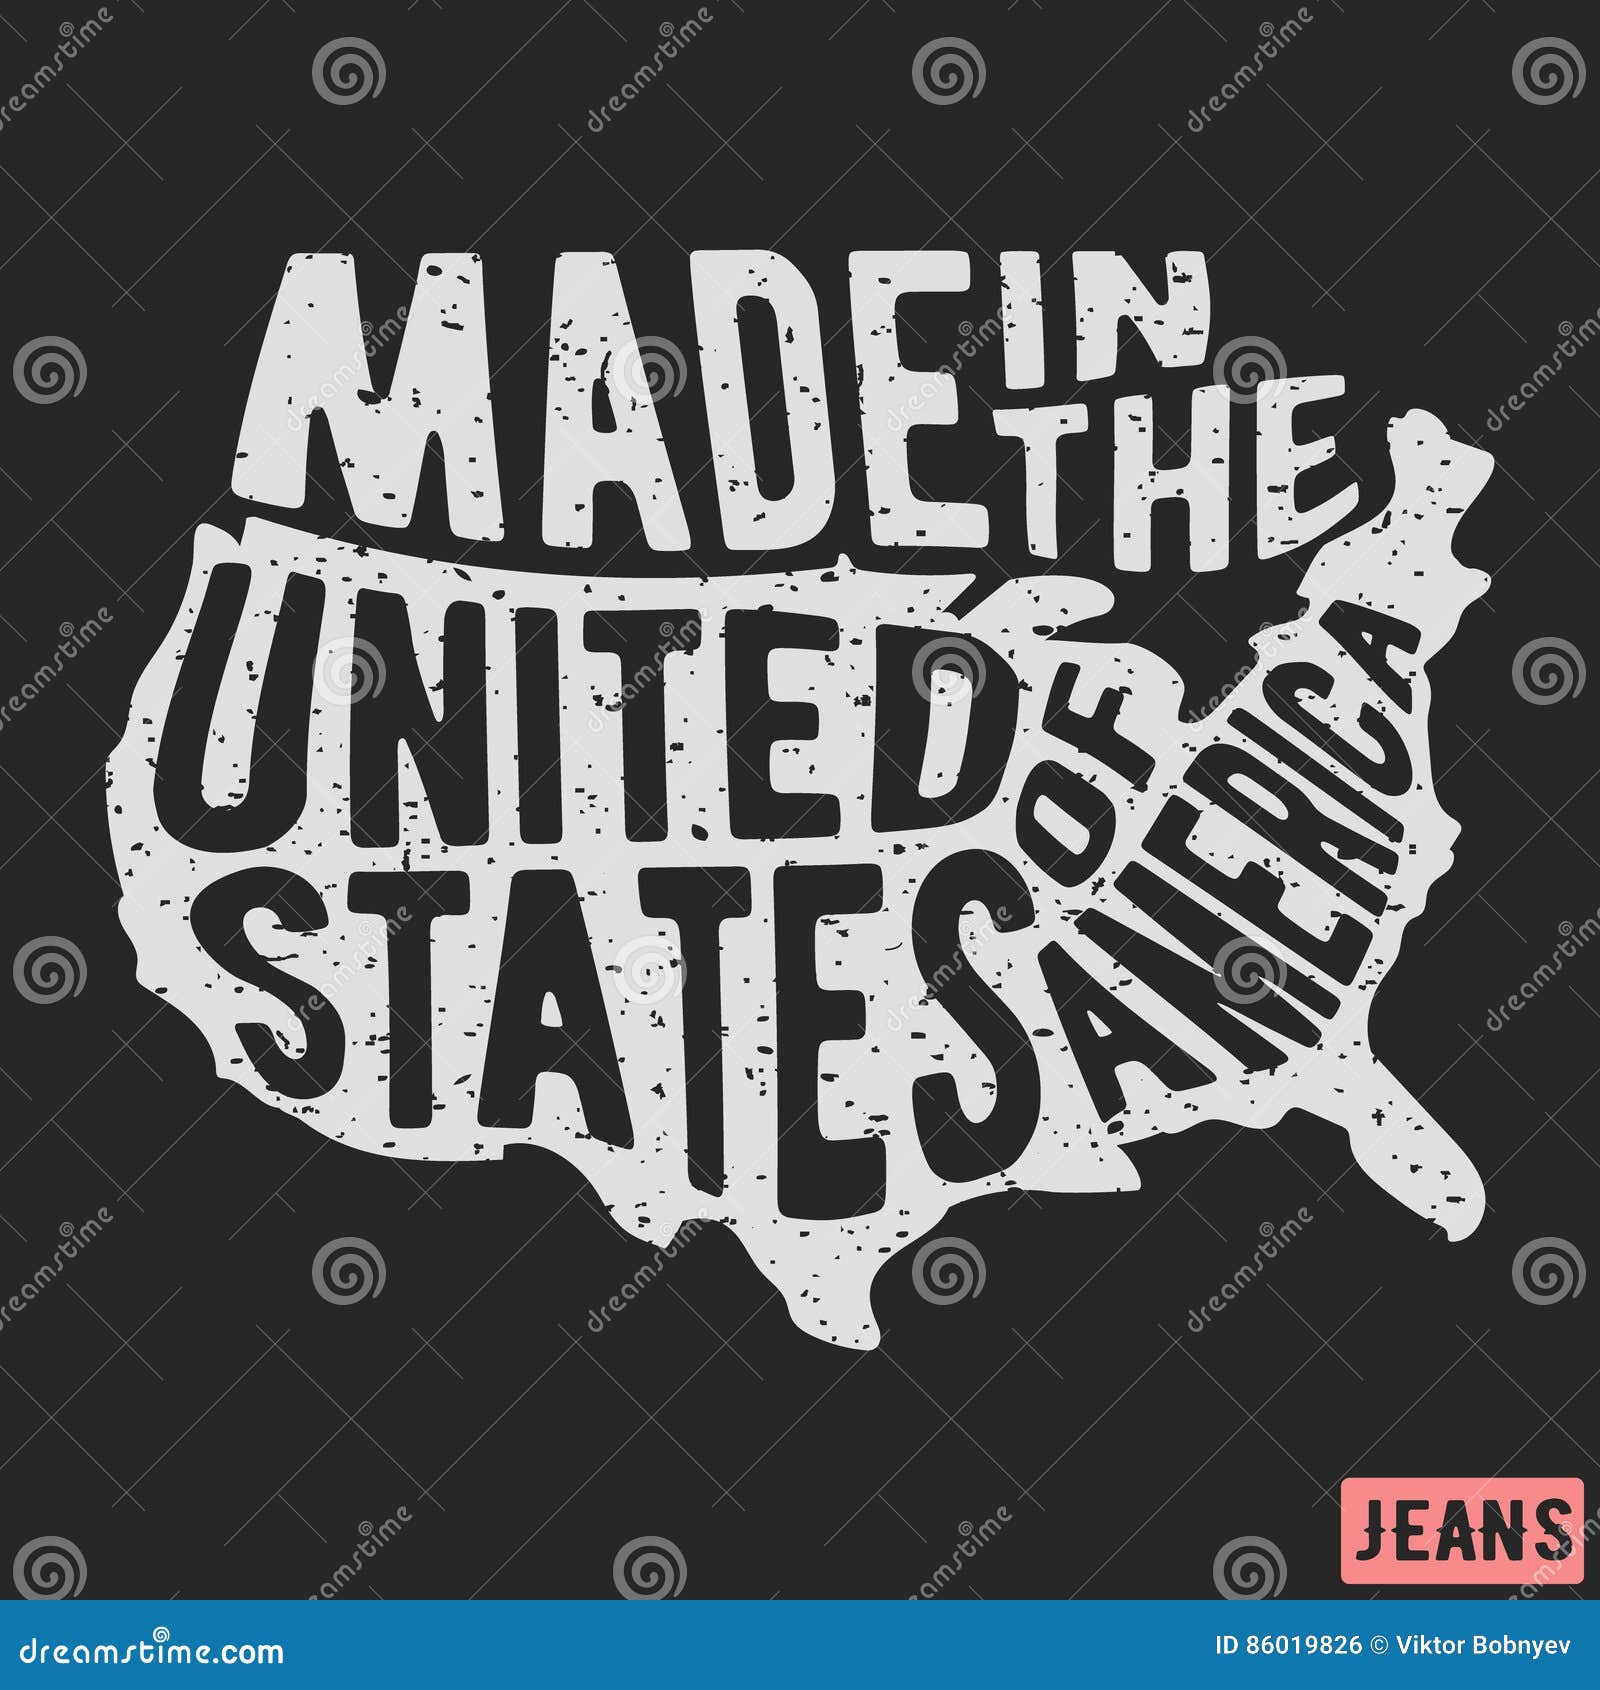 made in the usa vintage stamp